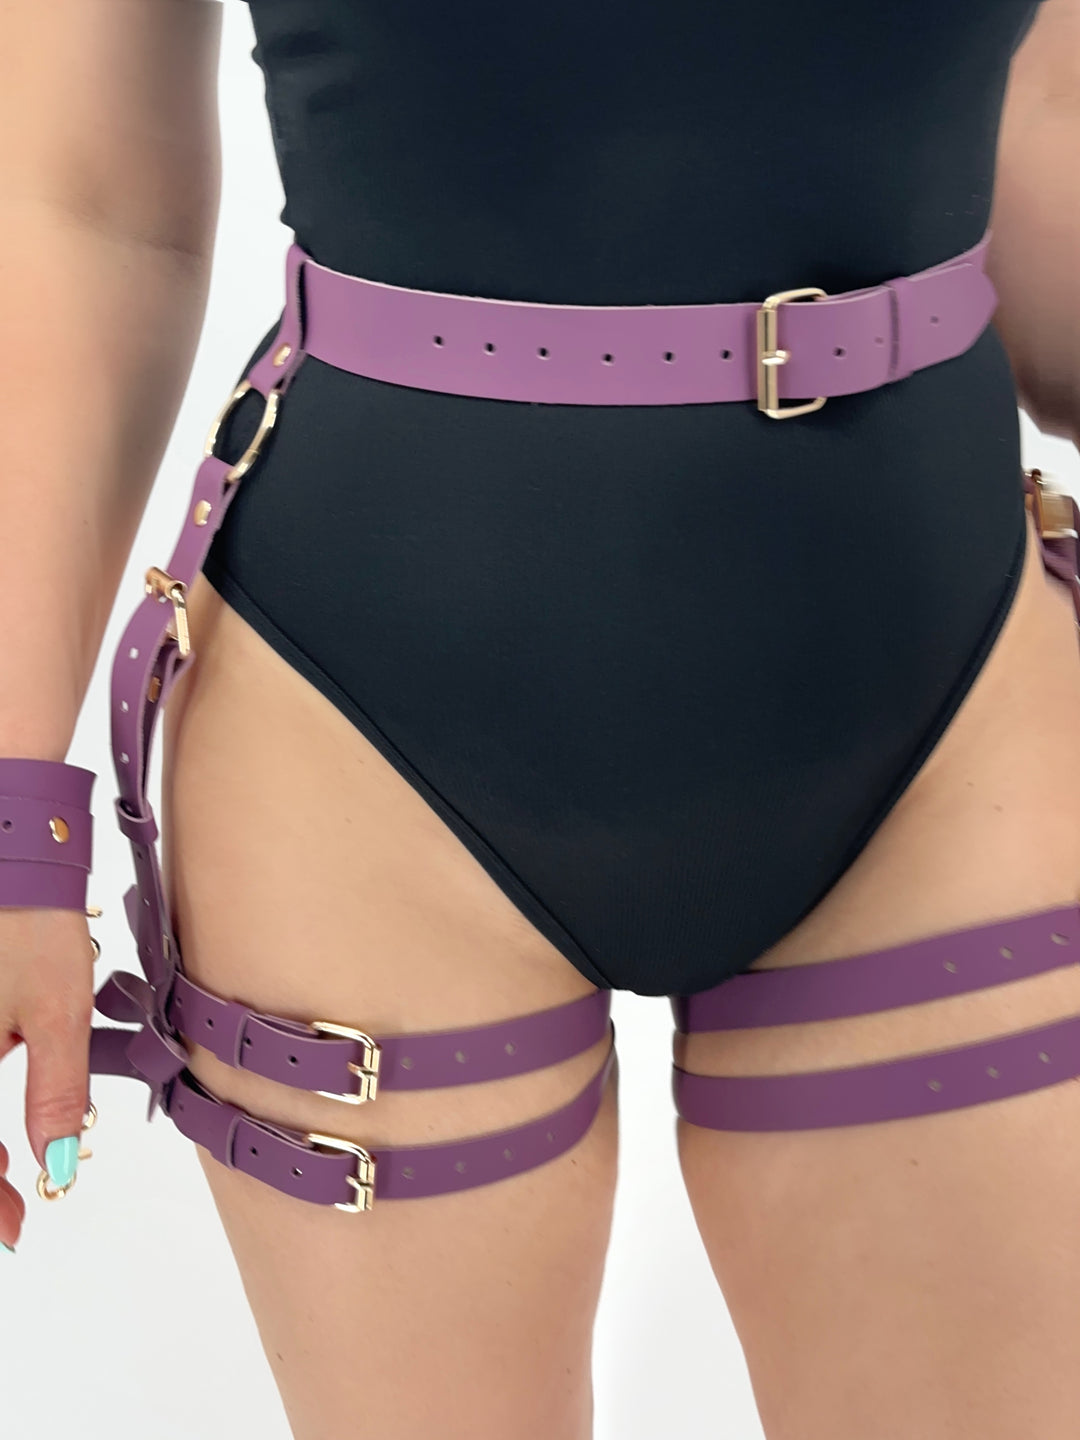 Premium Leather Garters with Handcuffs